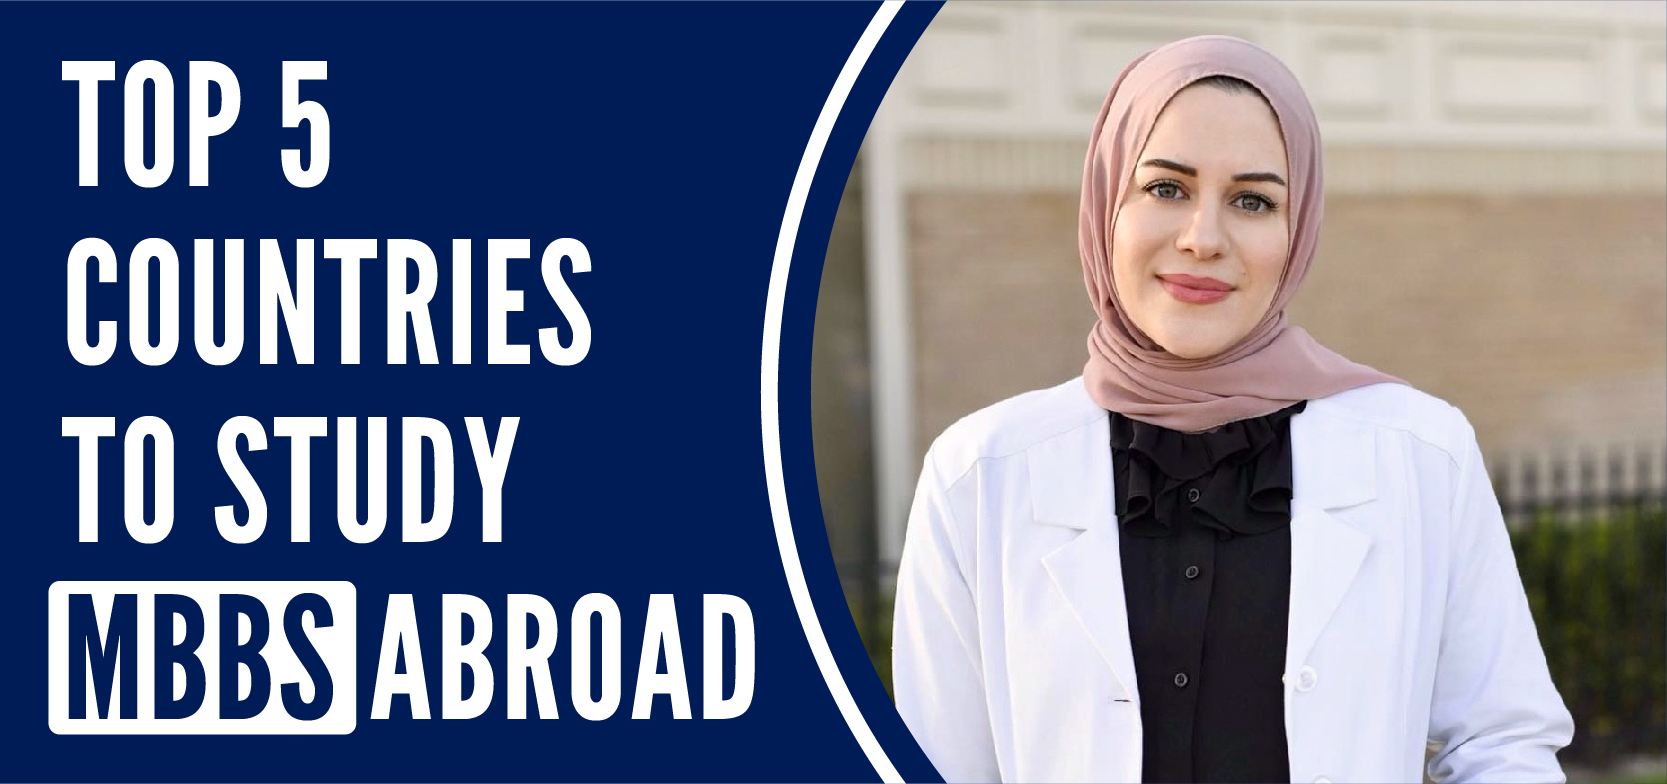 Top 5 Countries to study MBBS Abroad